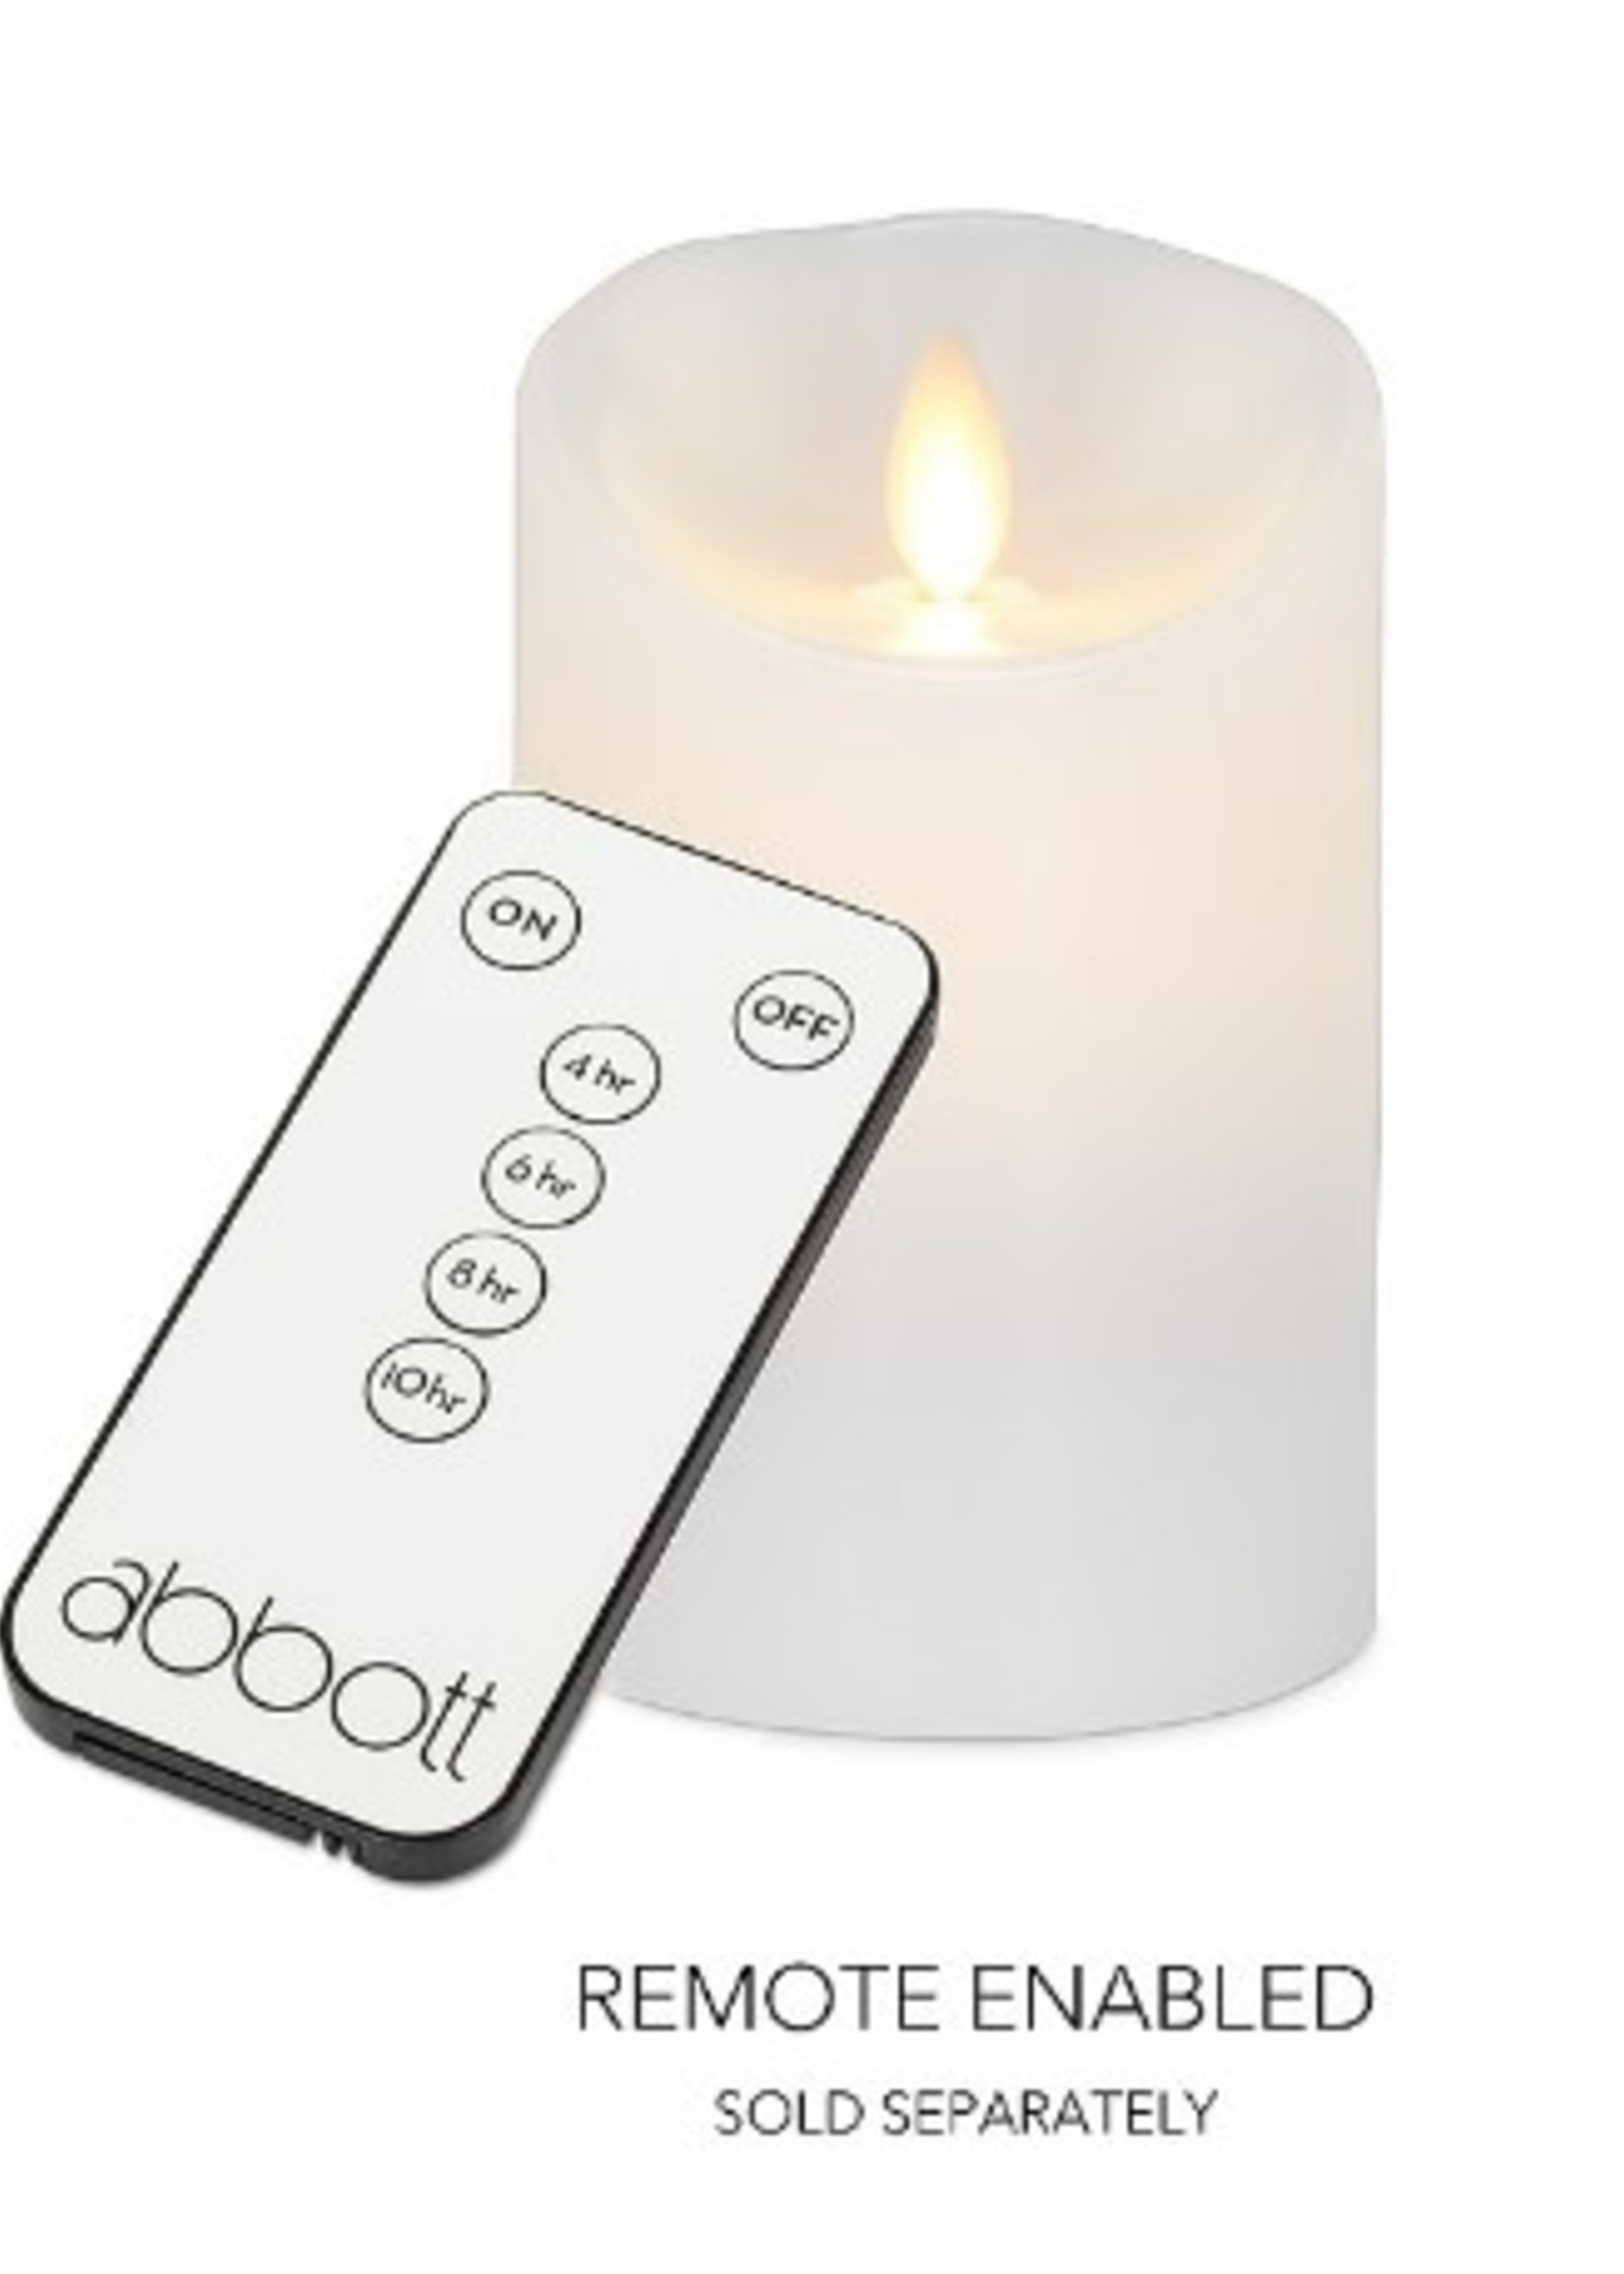 Abbott Flameless Candle * 4.5"H * Ivory * Remote Enabled